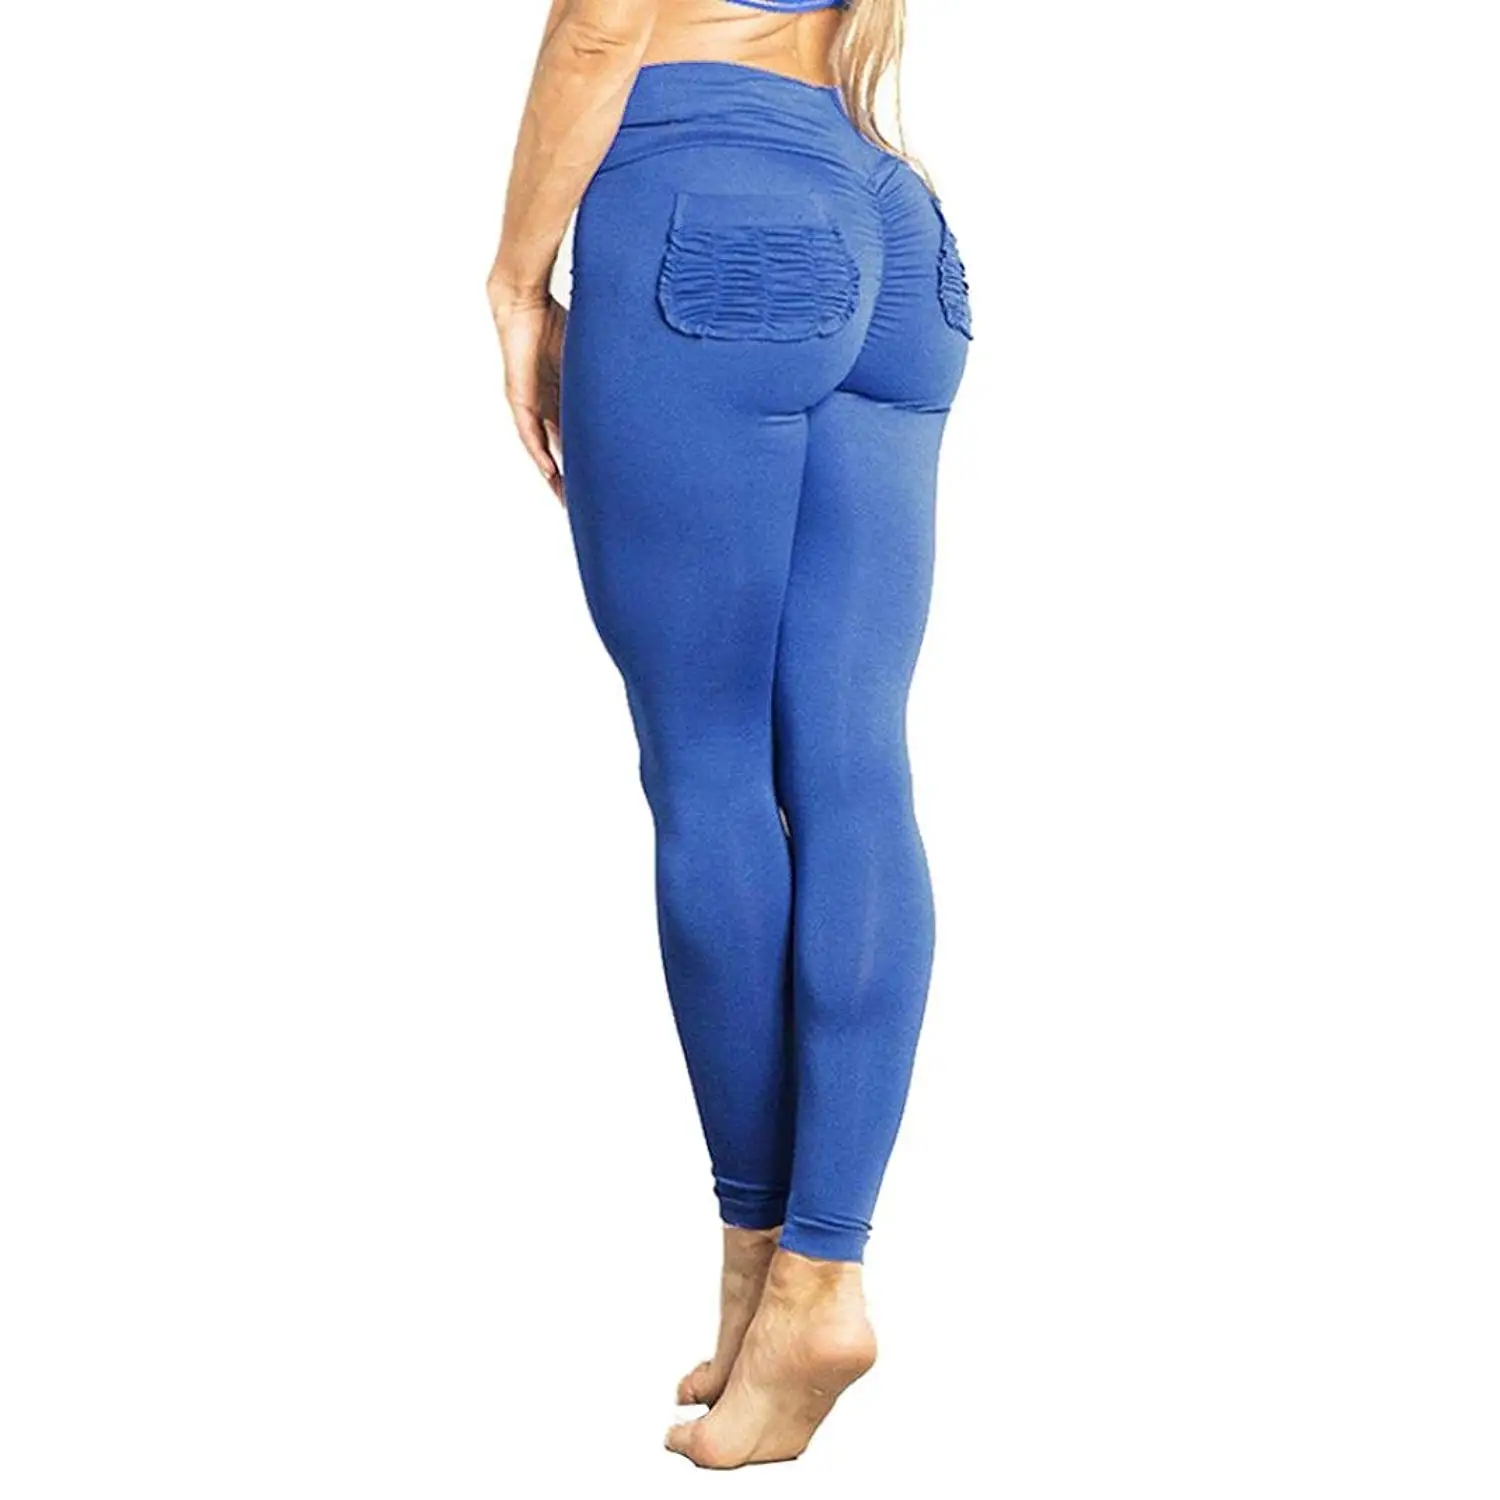 Cheap Yoga Pants With Skirt Attached Find Yoga Pants With Skirt